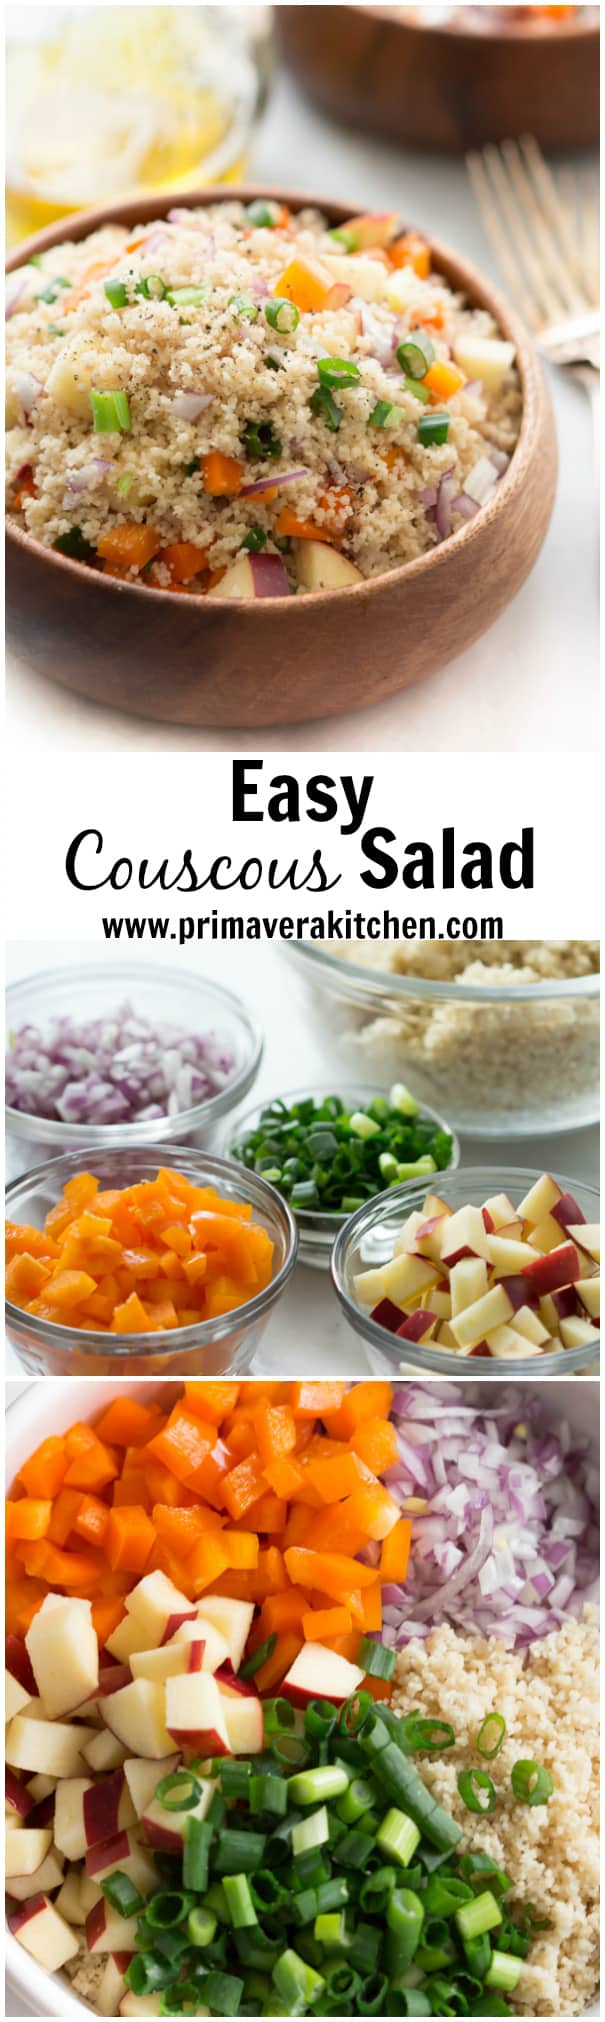 easy couscous salad - This easy couscous salad can be served hot or cold, with any assortment of fruits and vegetables. Lunch just got awesome.